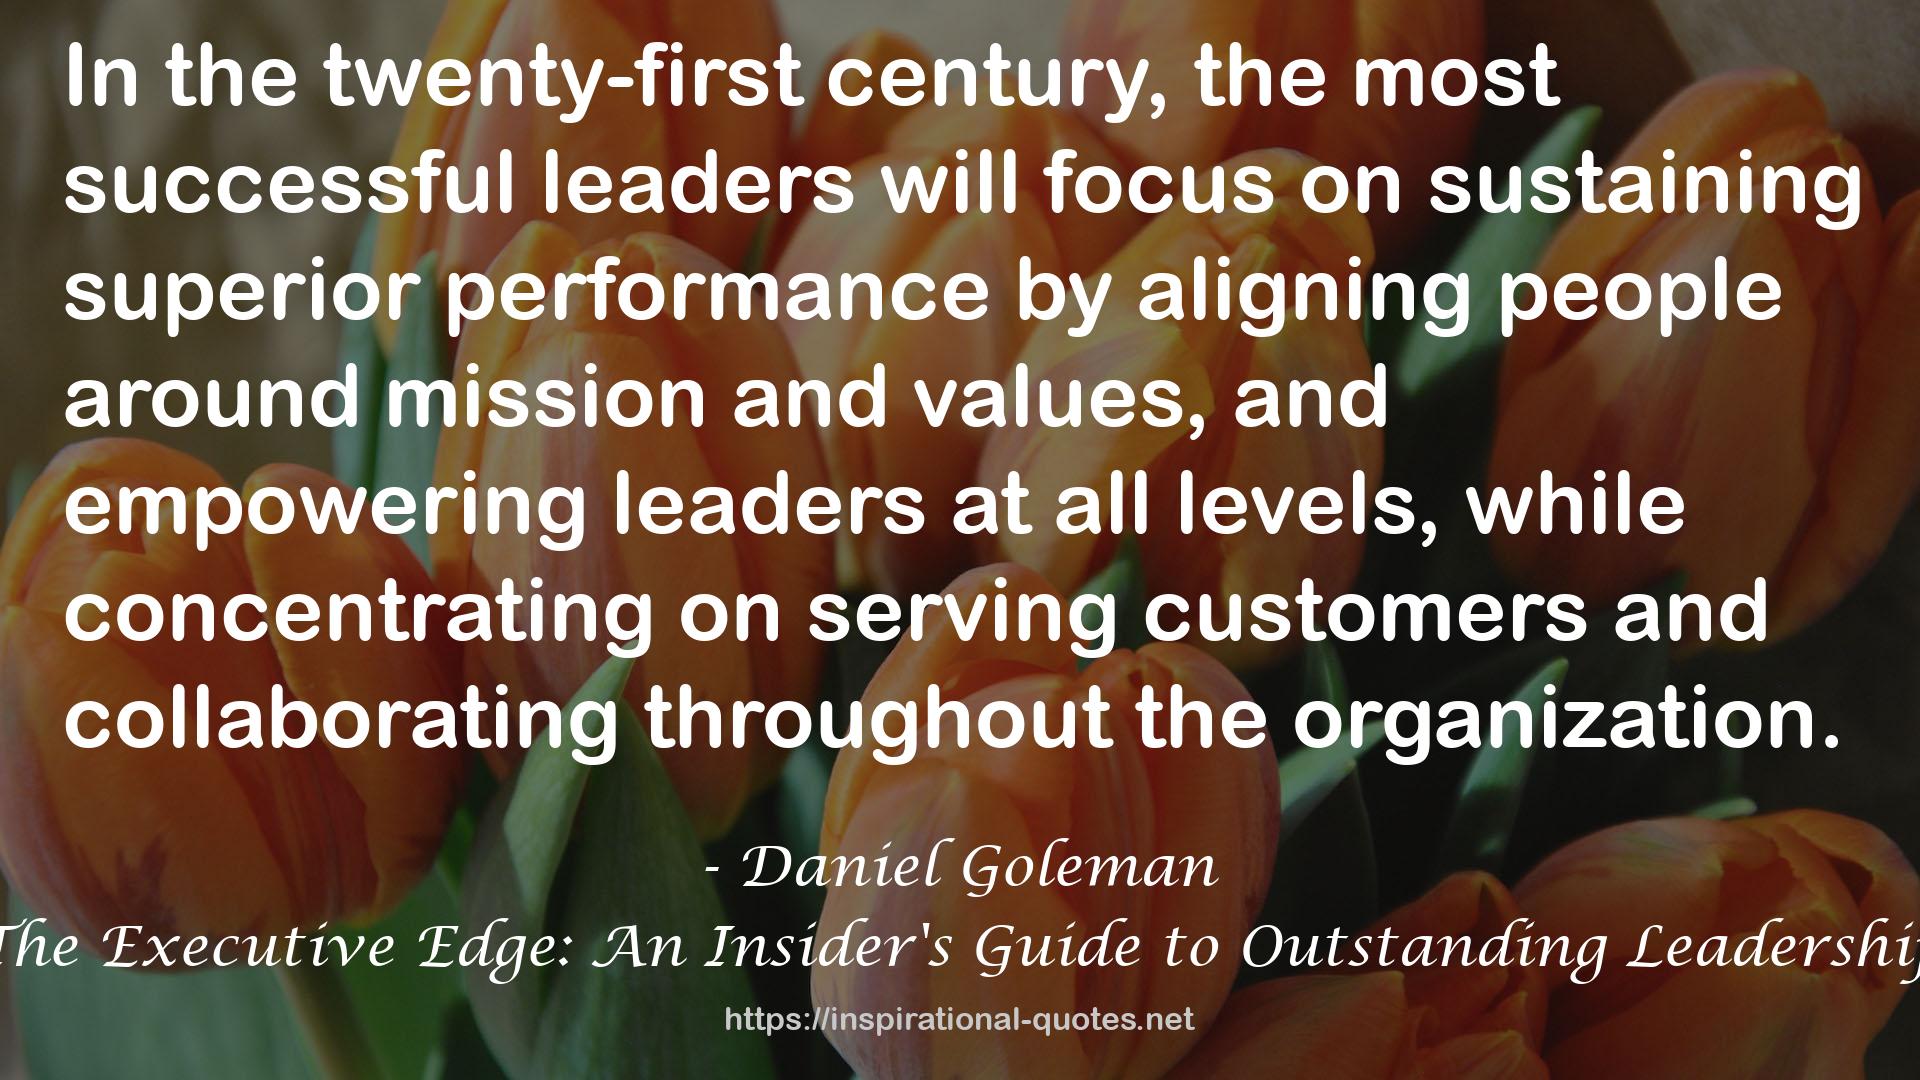 The Executive Edge: An Insider's Guide to Outstanding Leadership QUOTES